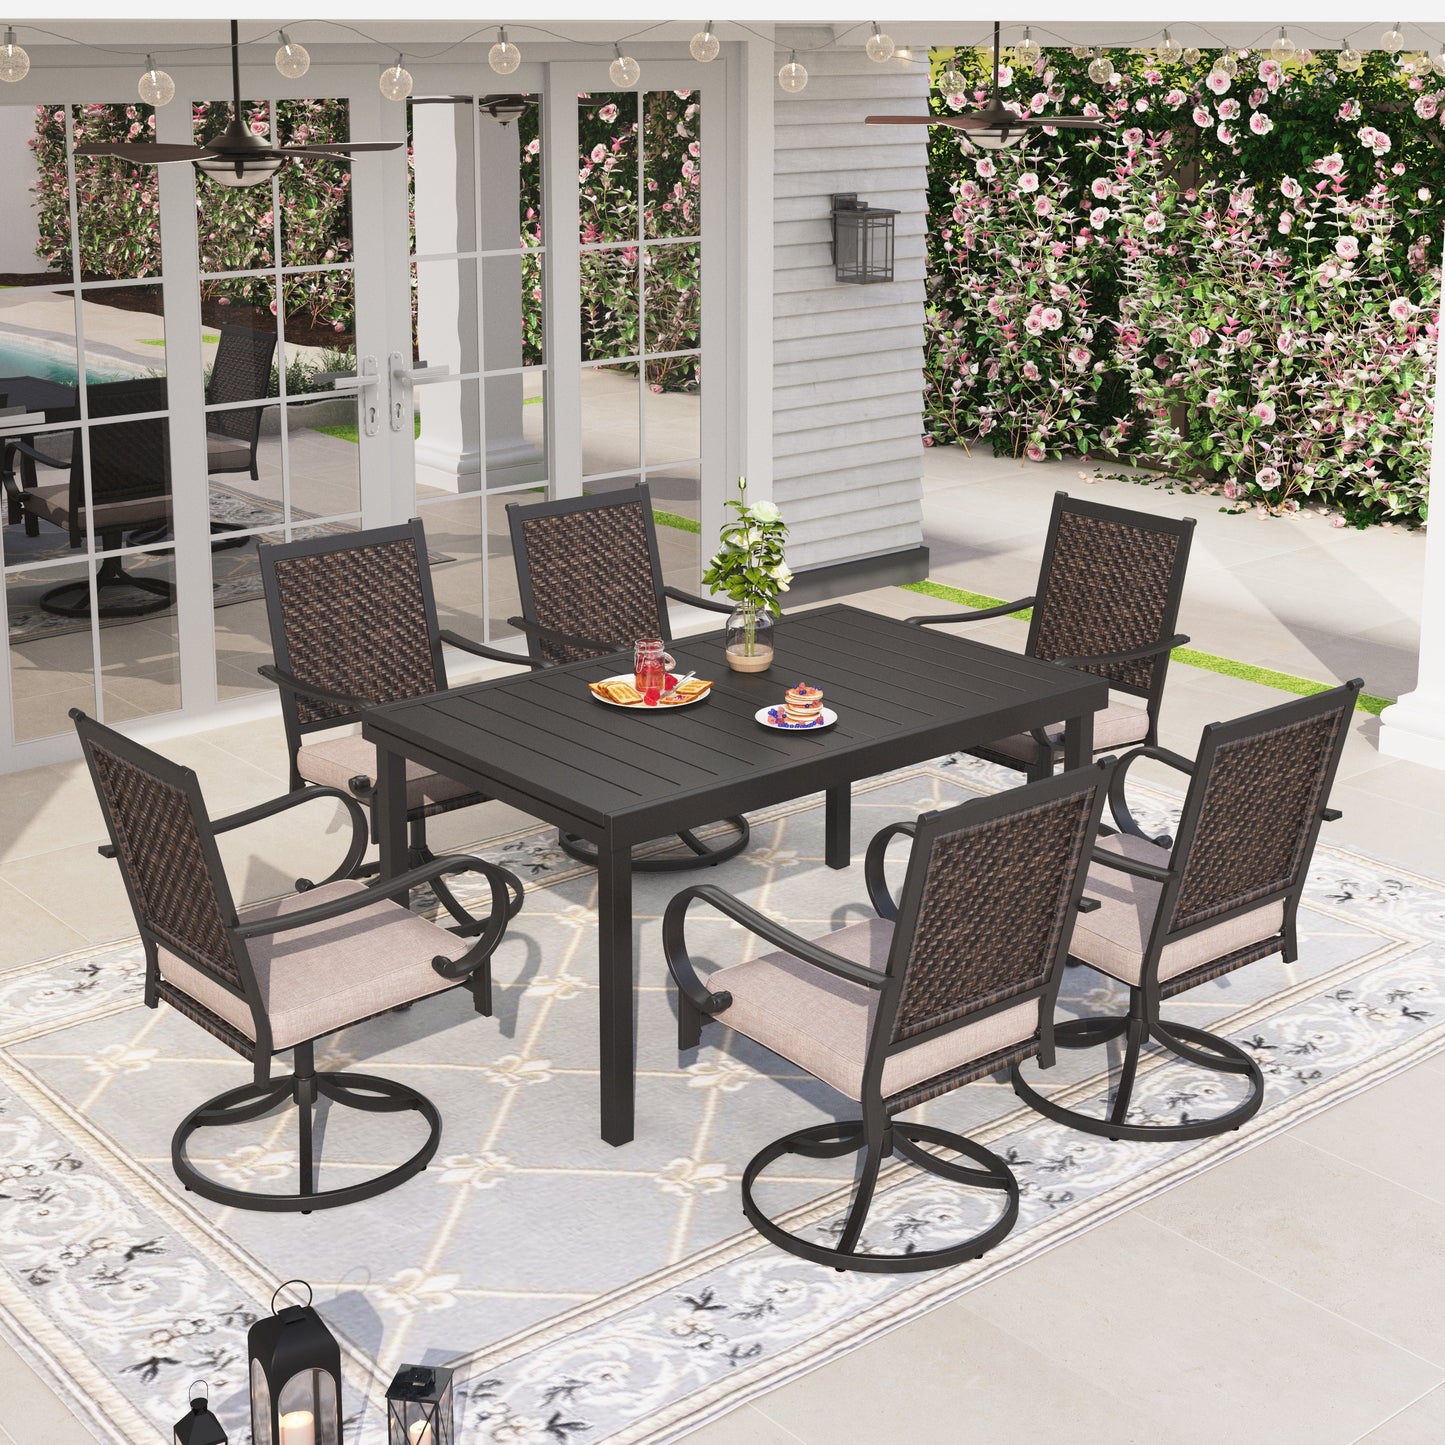 Sophia & William 7 Pieces Outdoor Patio Dining Set Wicker Swivel Chairs and Steel Table